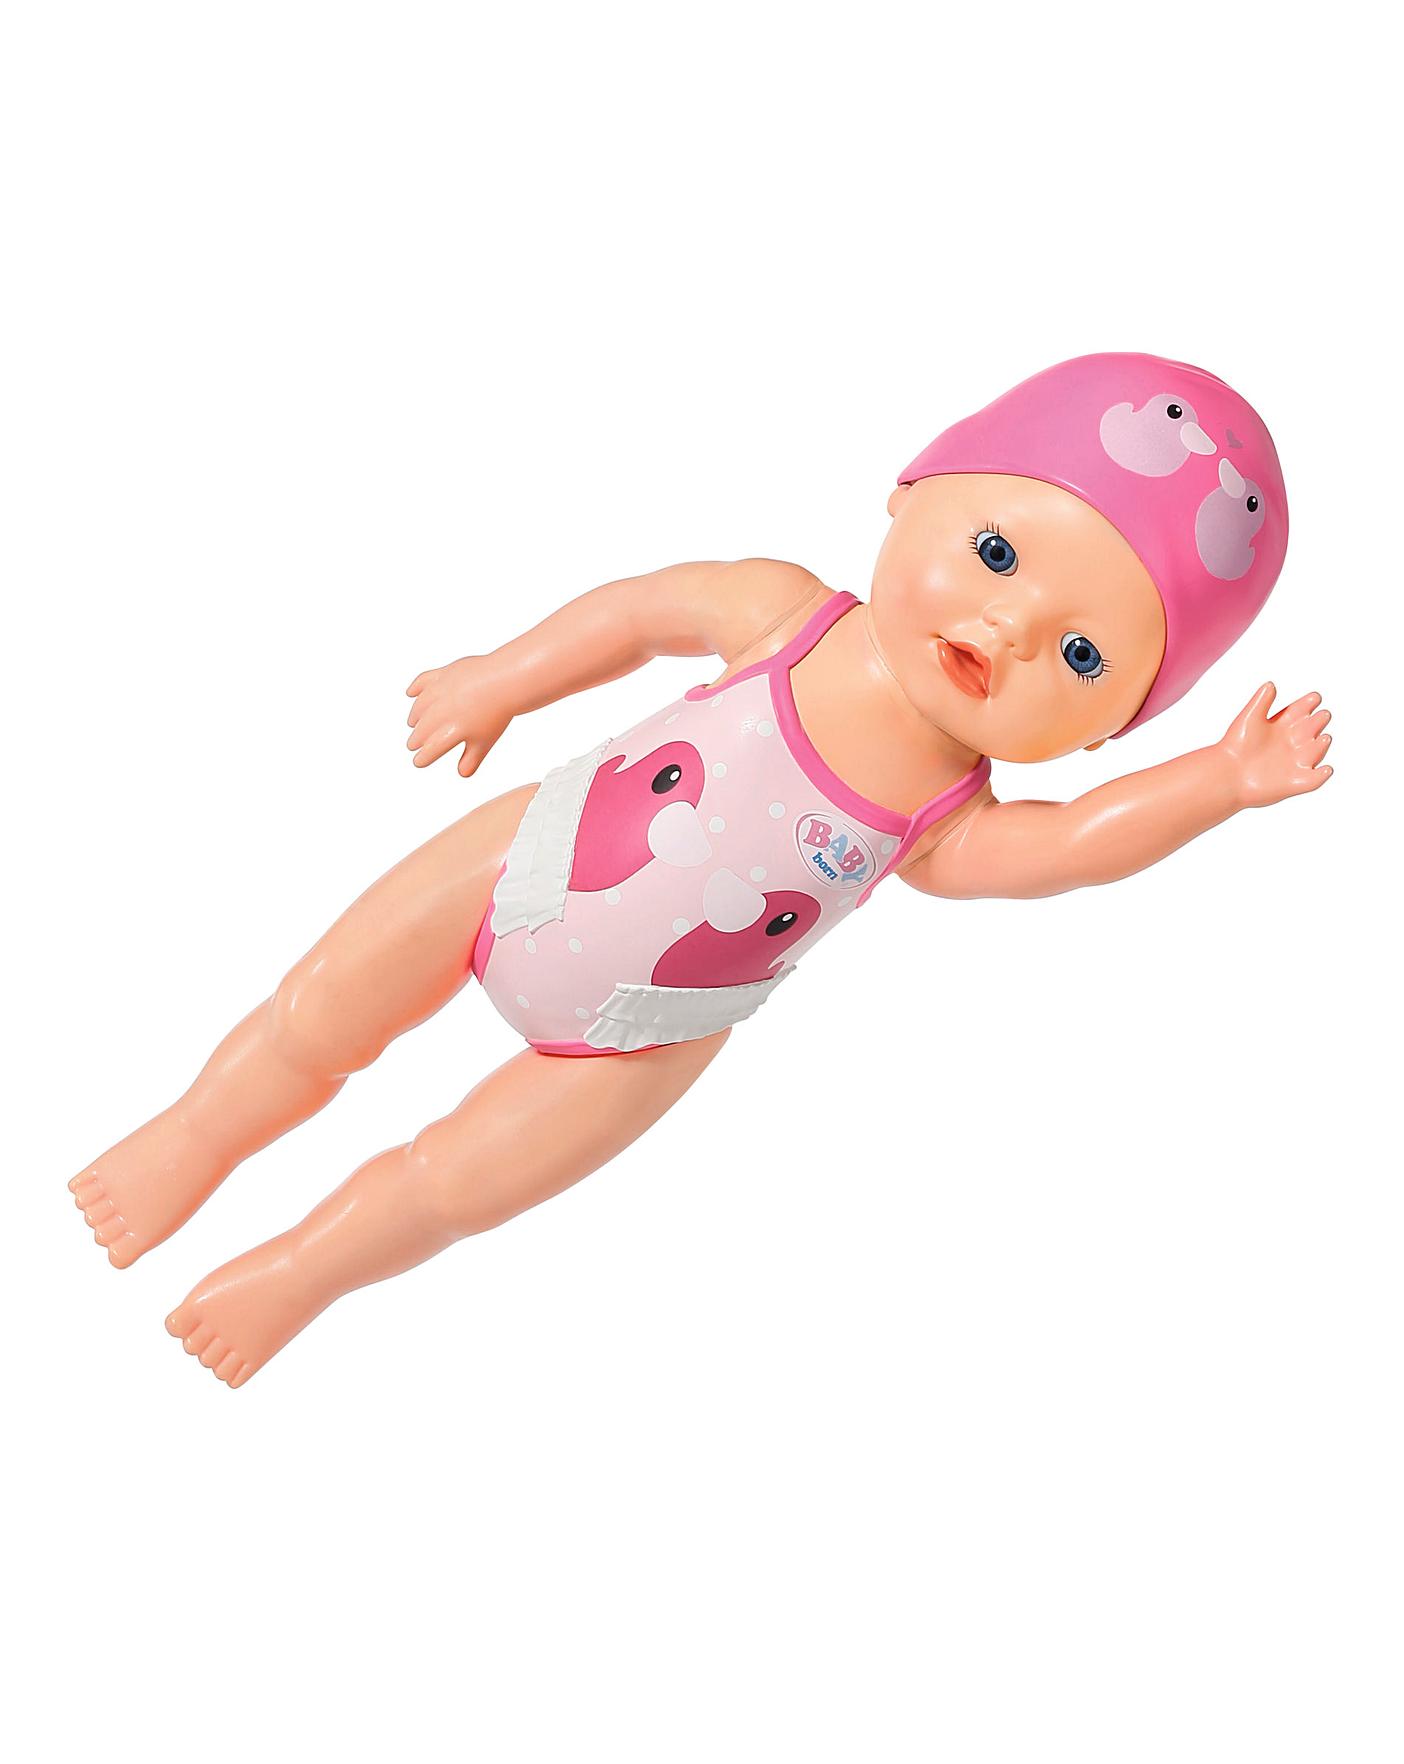 a baby doll that swims